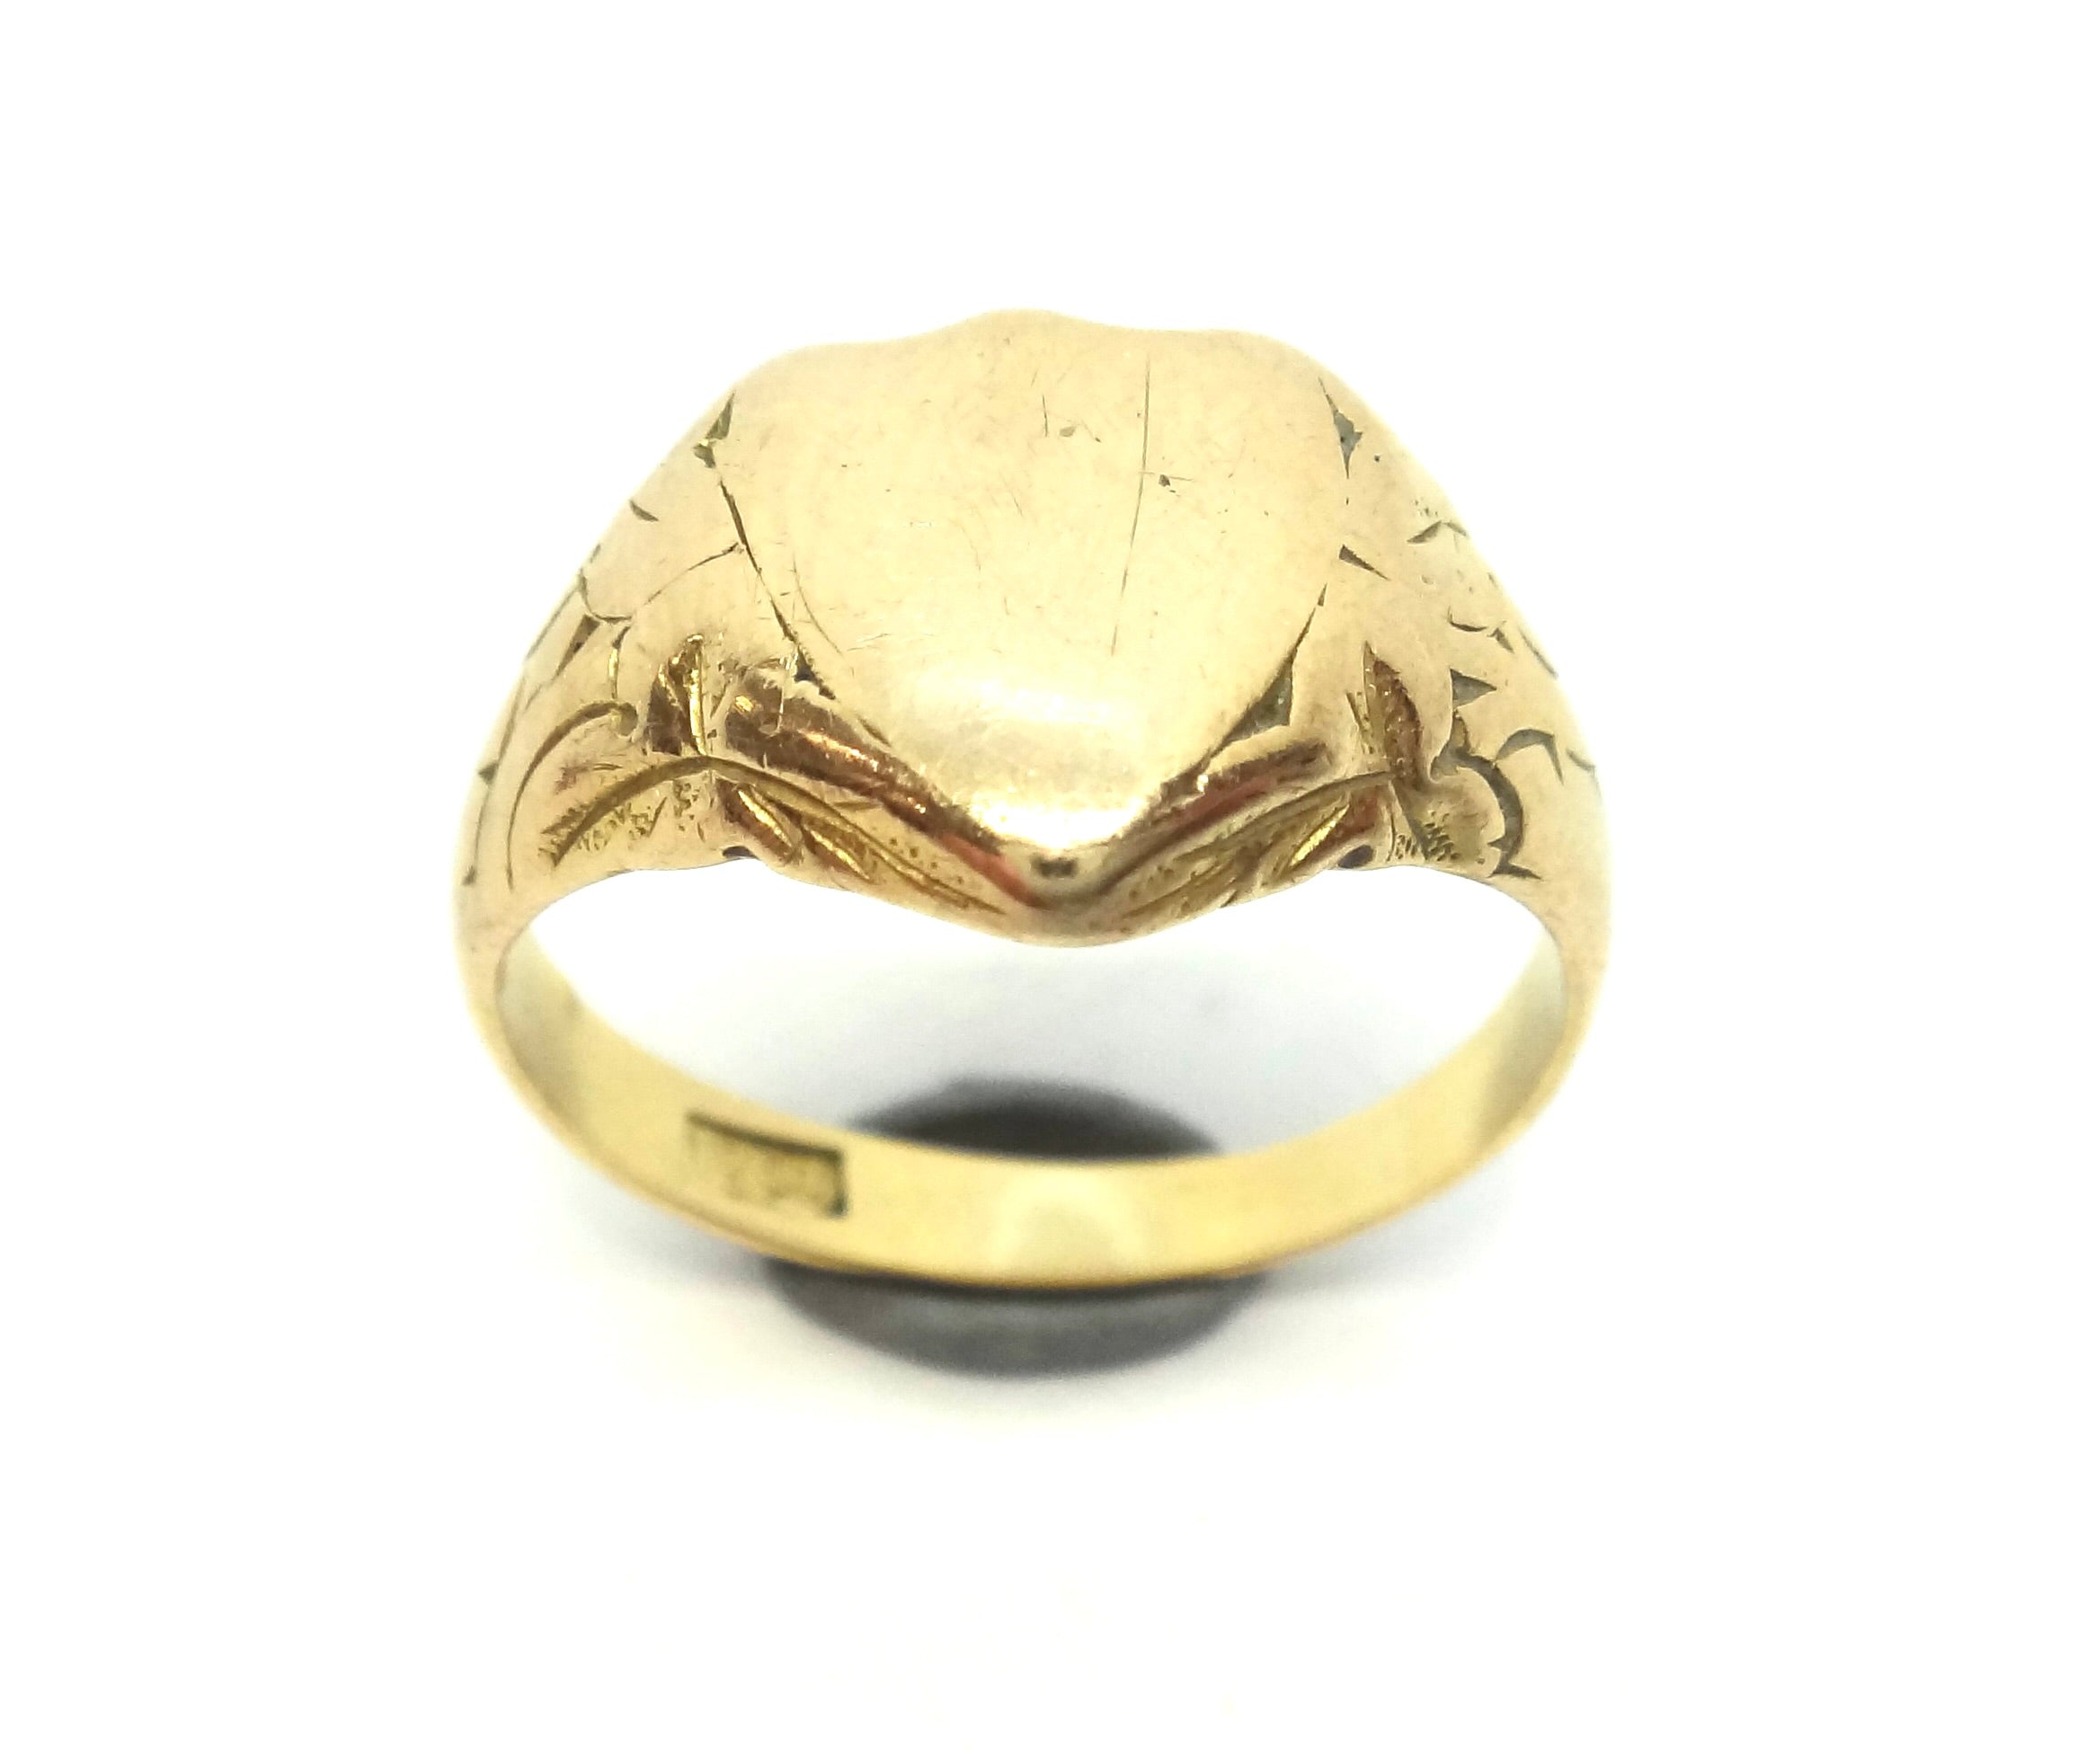 ANTIQUE 18ct Yellow GOLD Shield Shaped Signet Ring c.1900